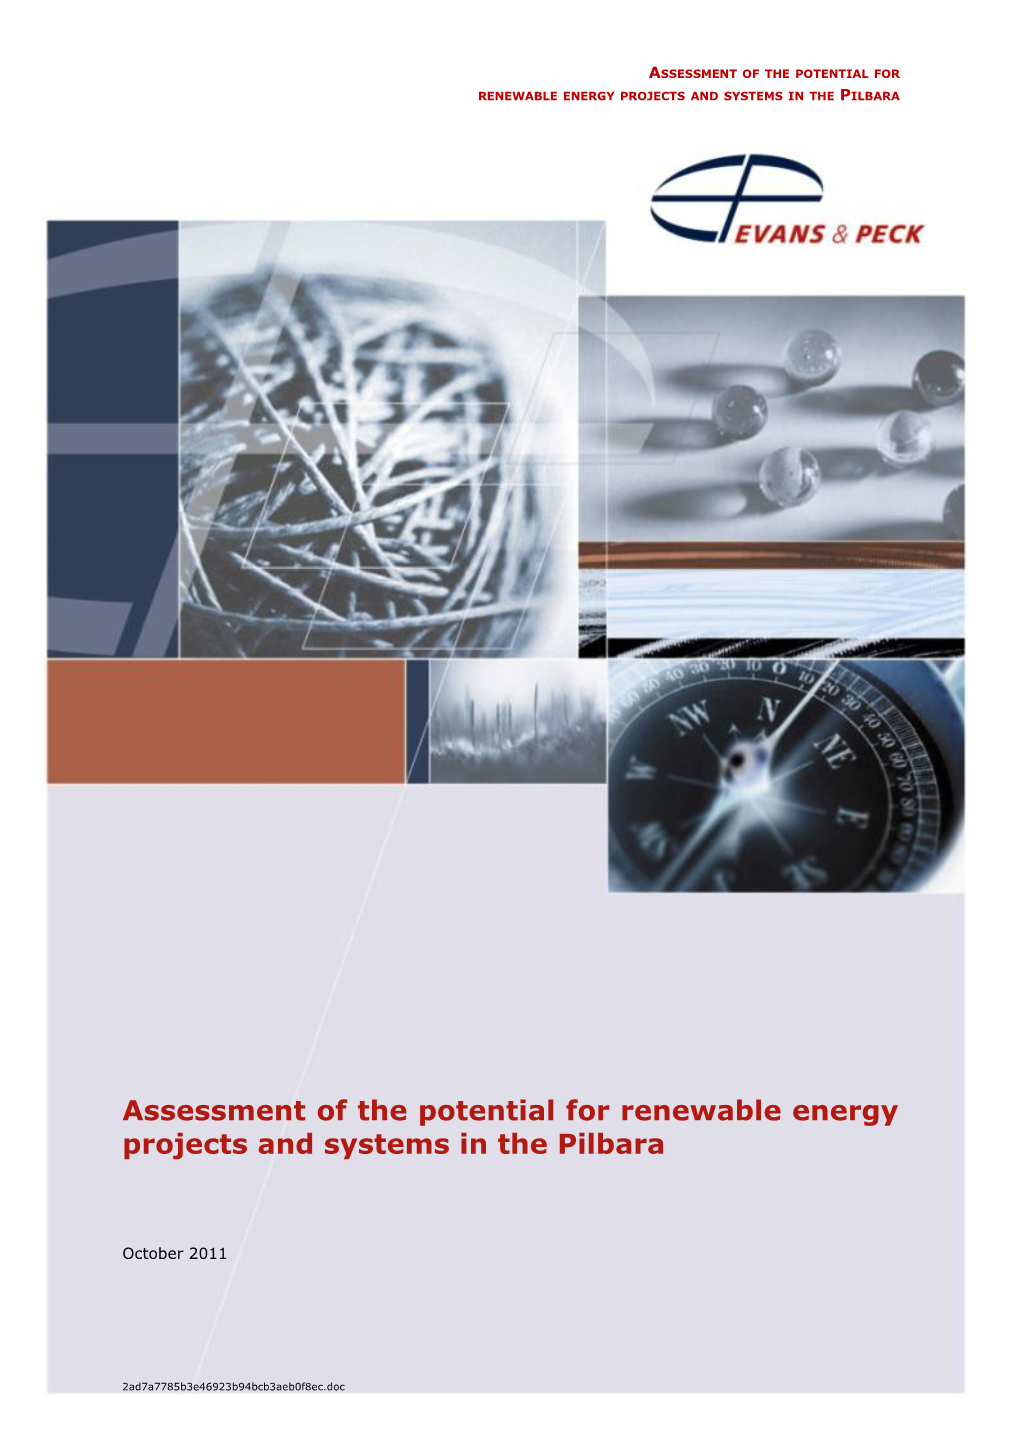 Assessment of the Potential for Renewable Energy Projects and Systems in the Pilbara